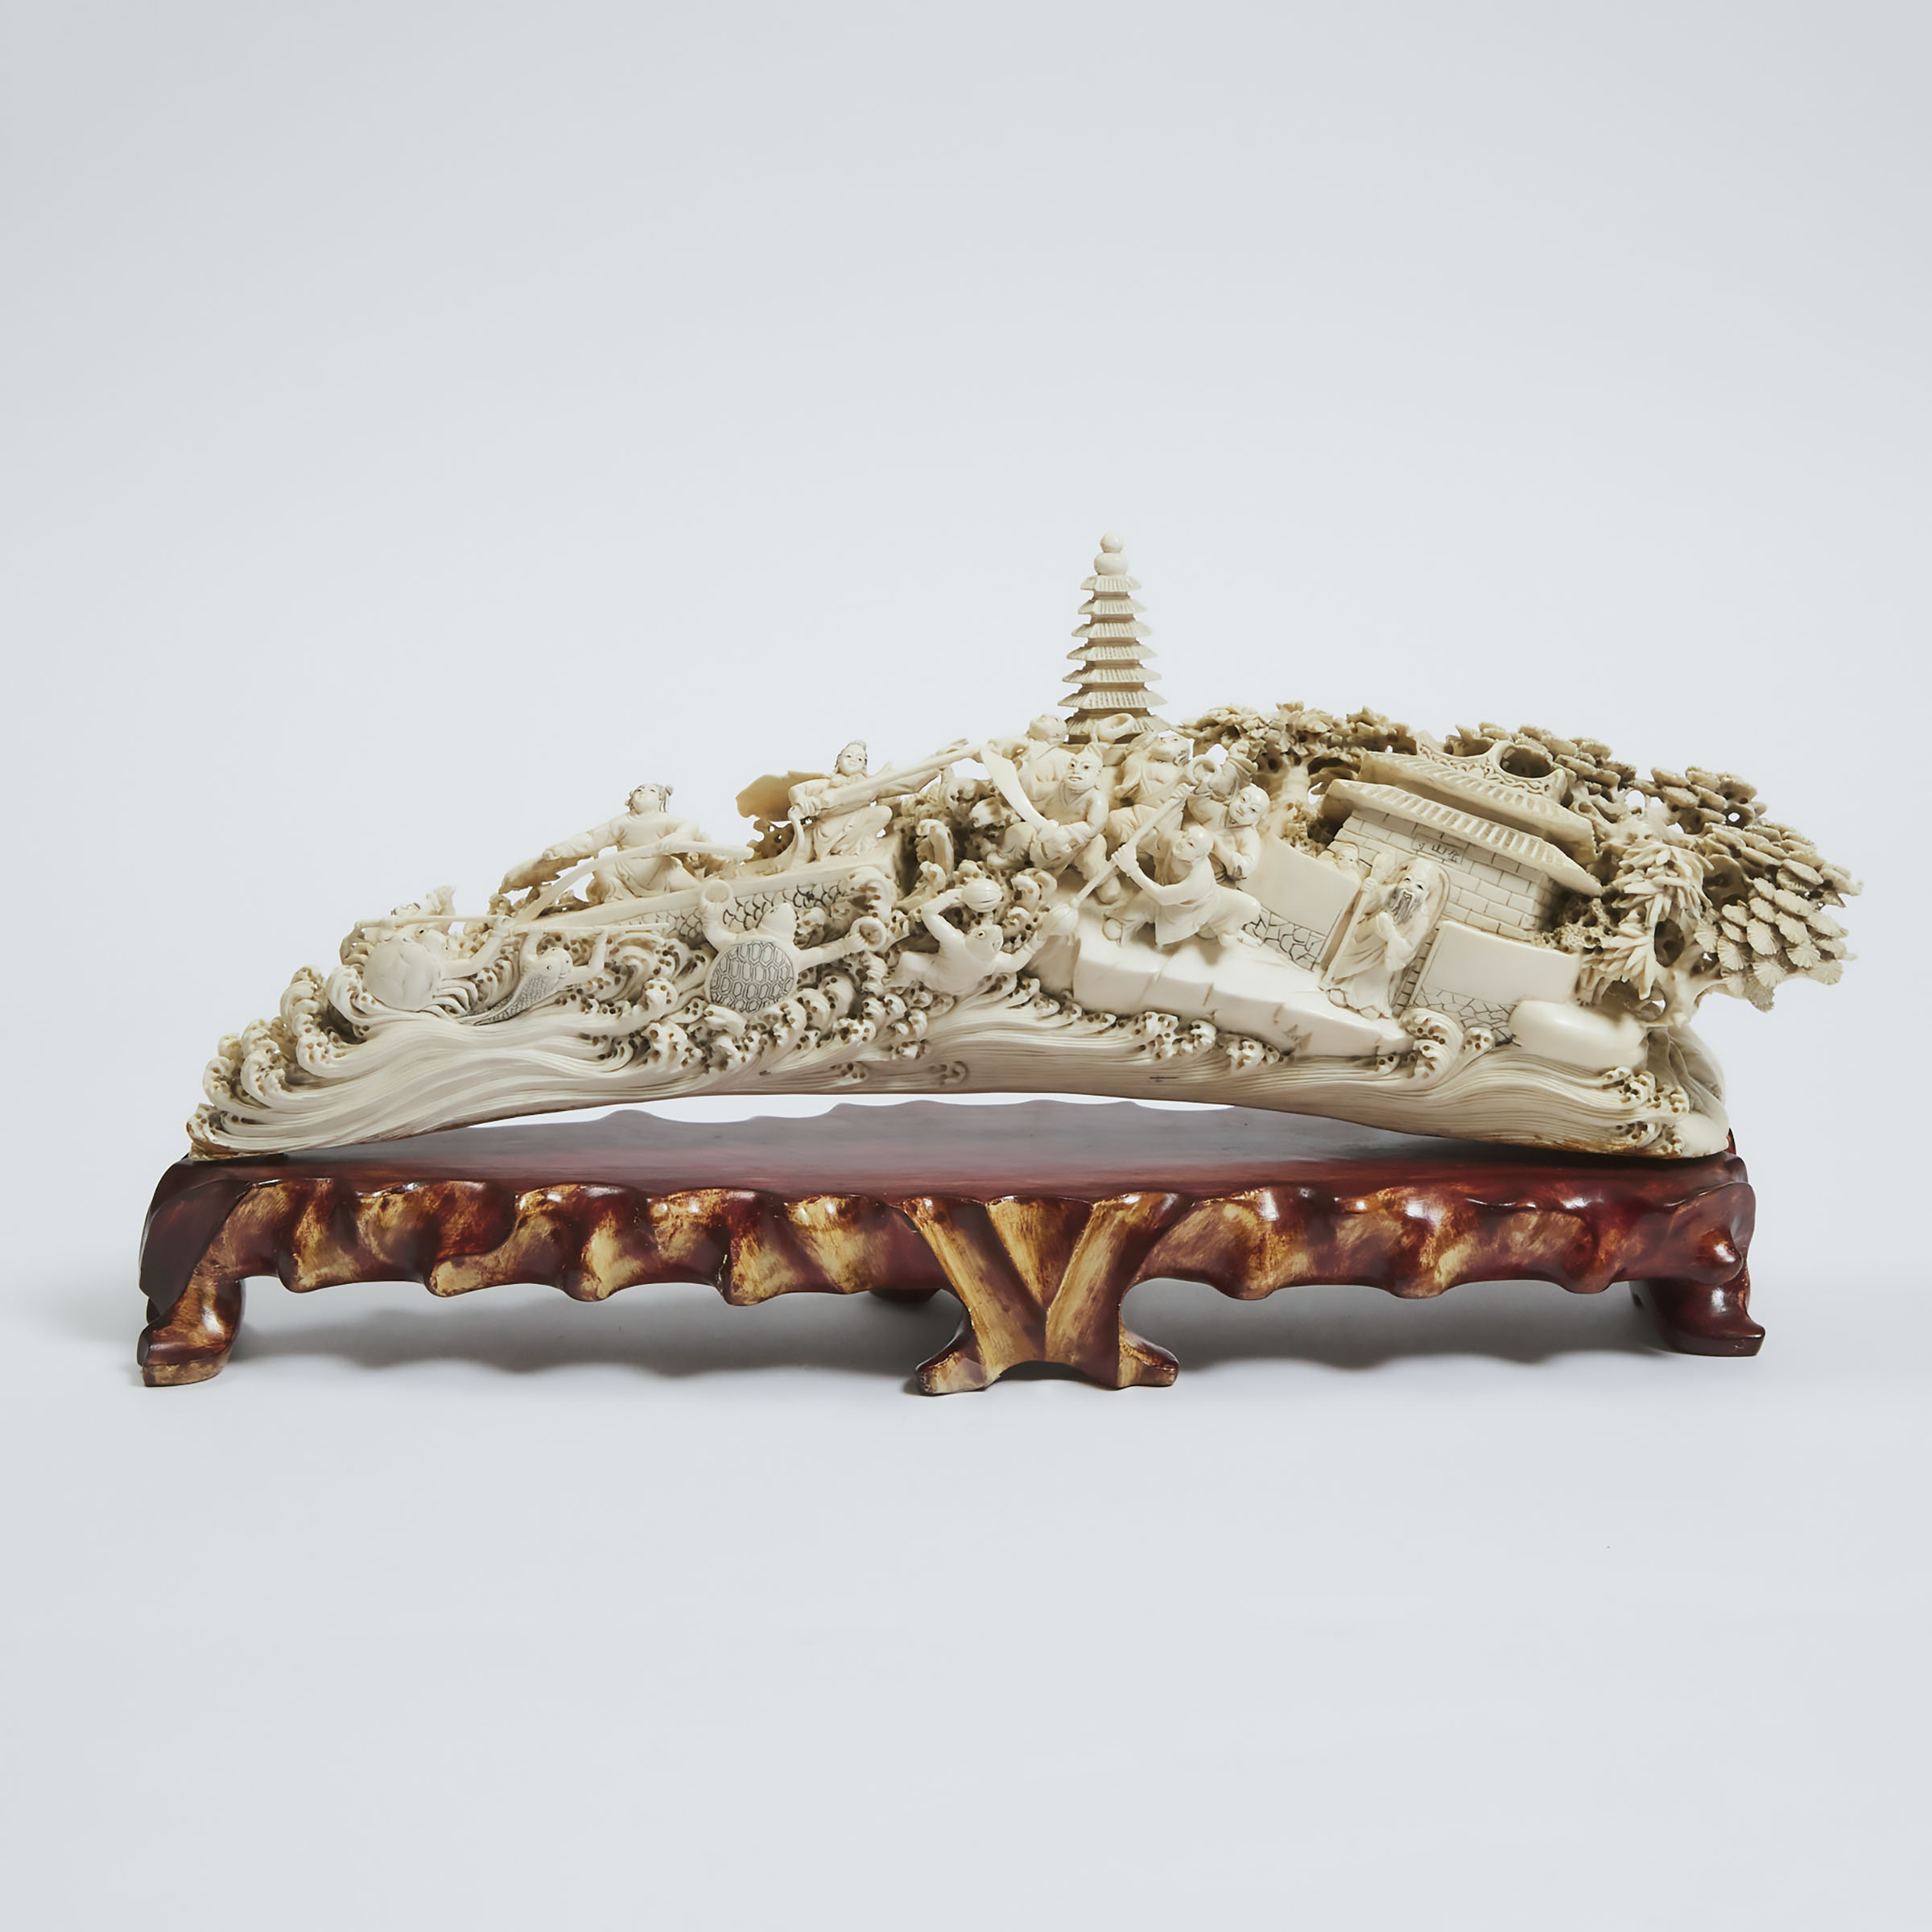 A Large Chinese Ivory 'Legend of the White Snake' Landscape Carving, Early to Mid 20th Century